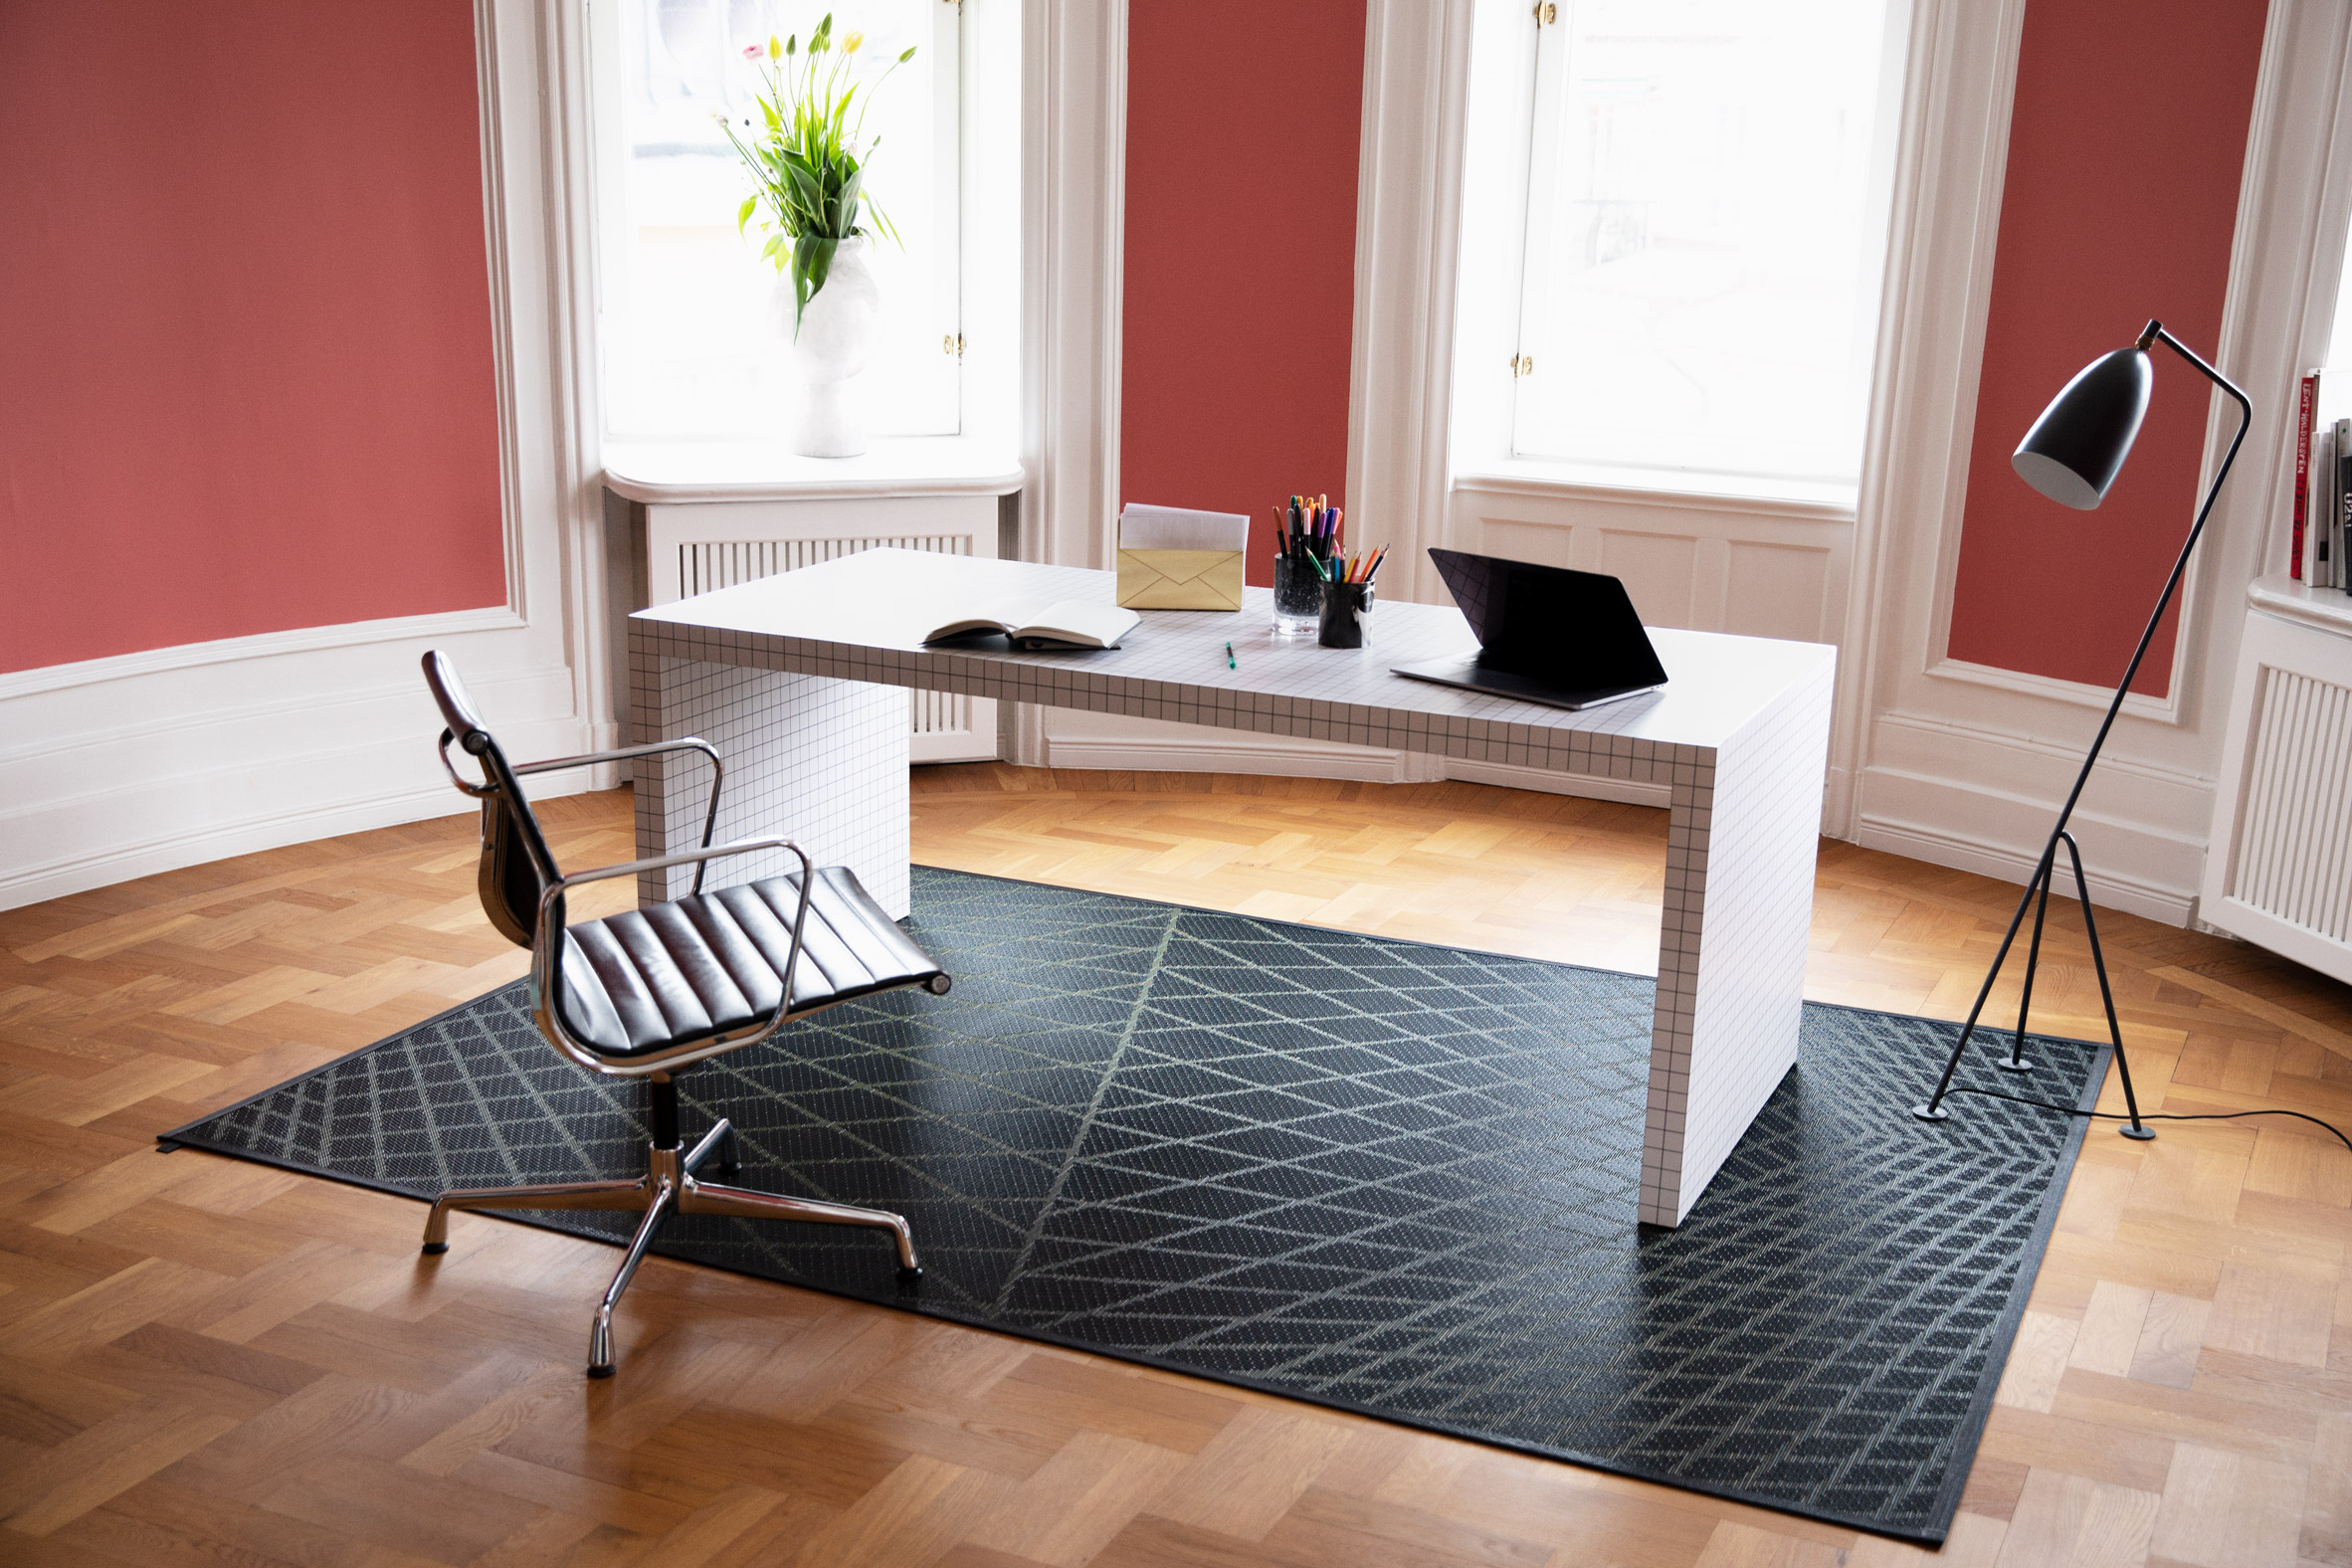 Made-to-measure rug from Bolon